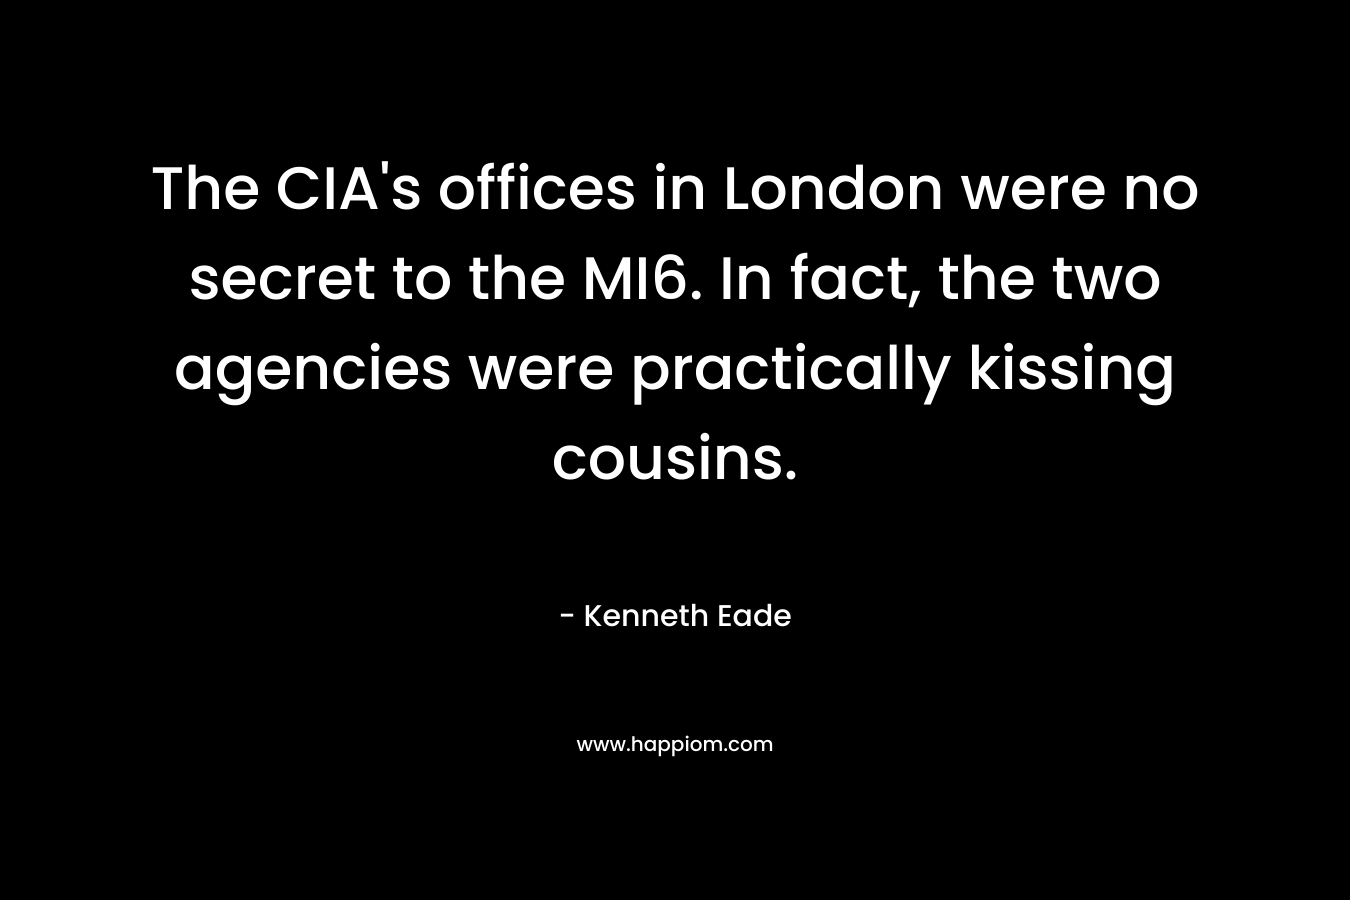 The CIA's offices in London were no secret to the MI6. In fact, the two agencies were practically kissing cousins.